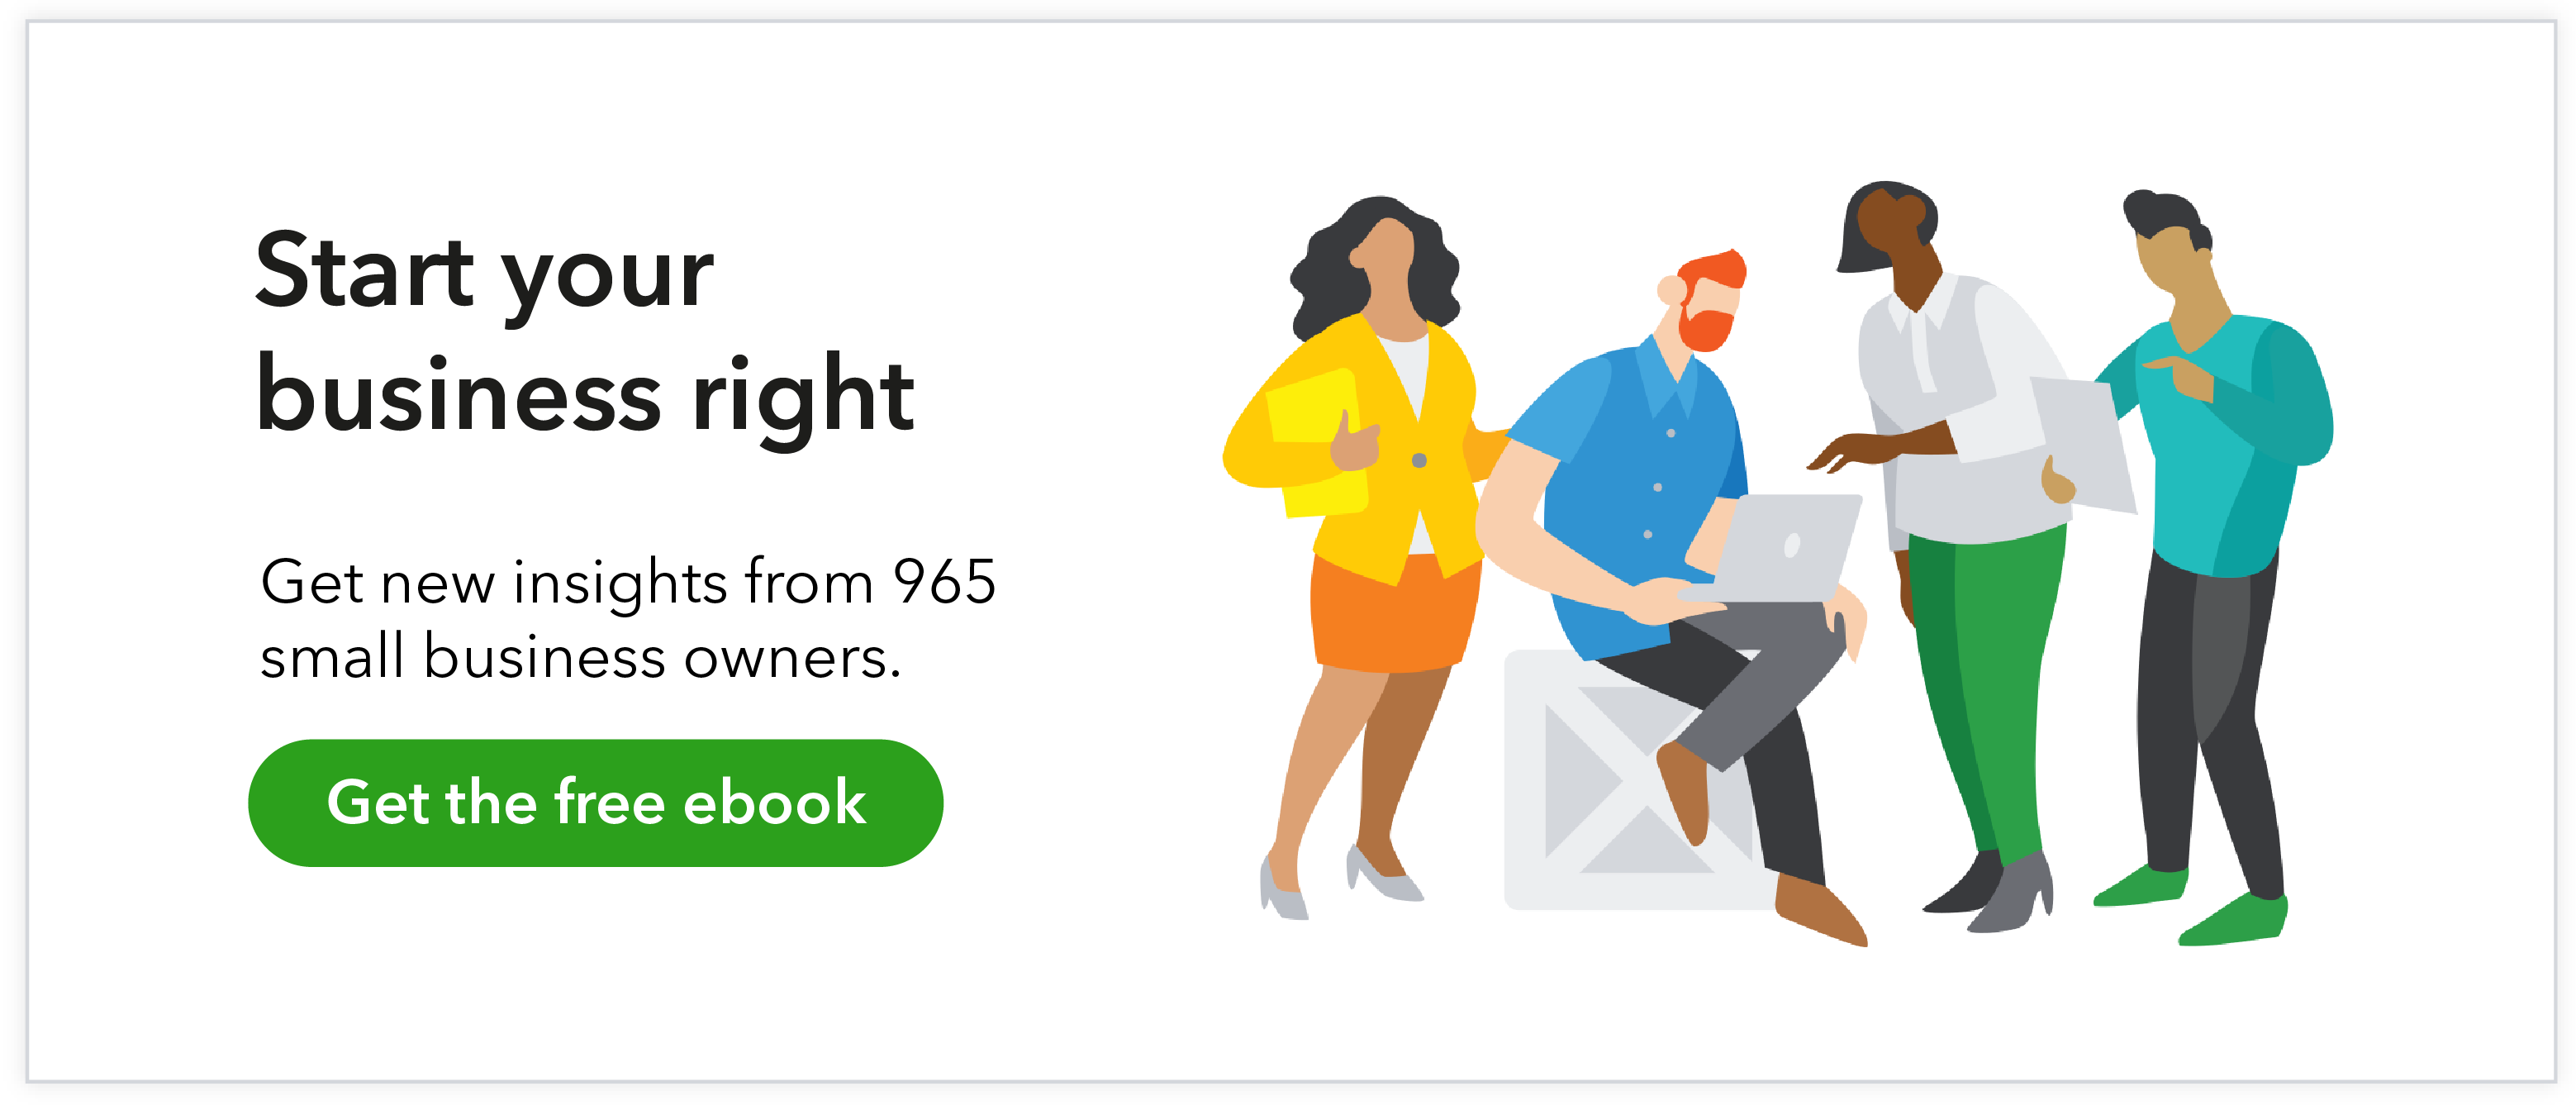 Start your business right. Get new insights from 965 small business owners. Get the free ebook.